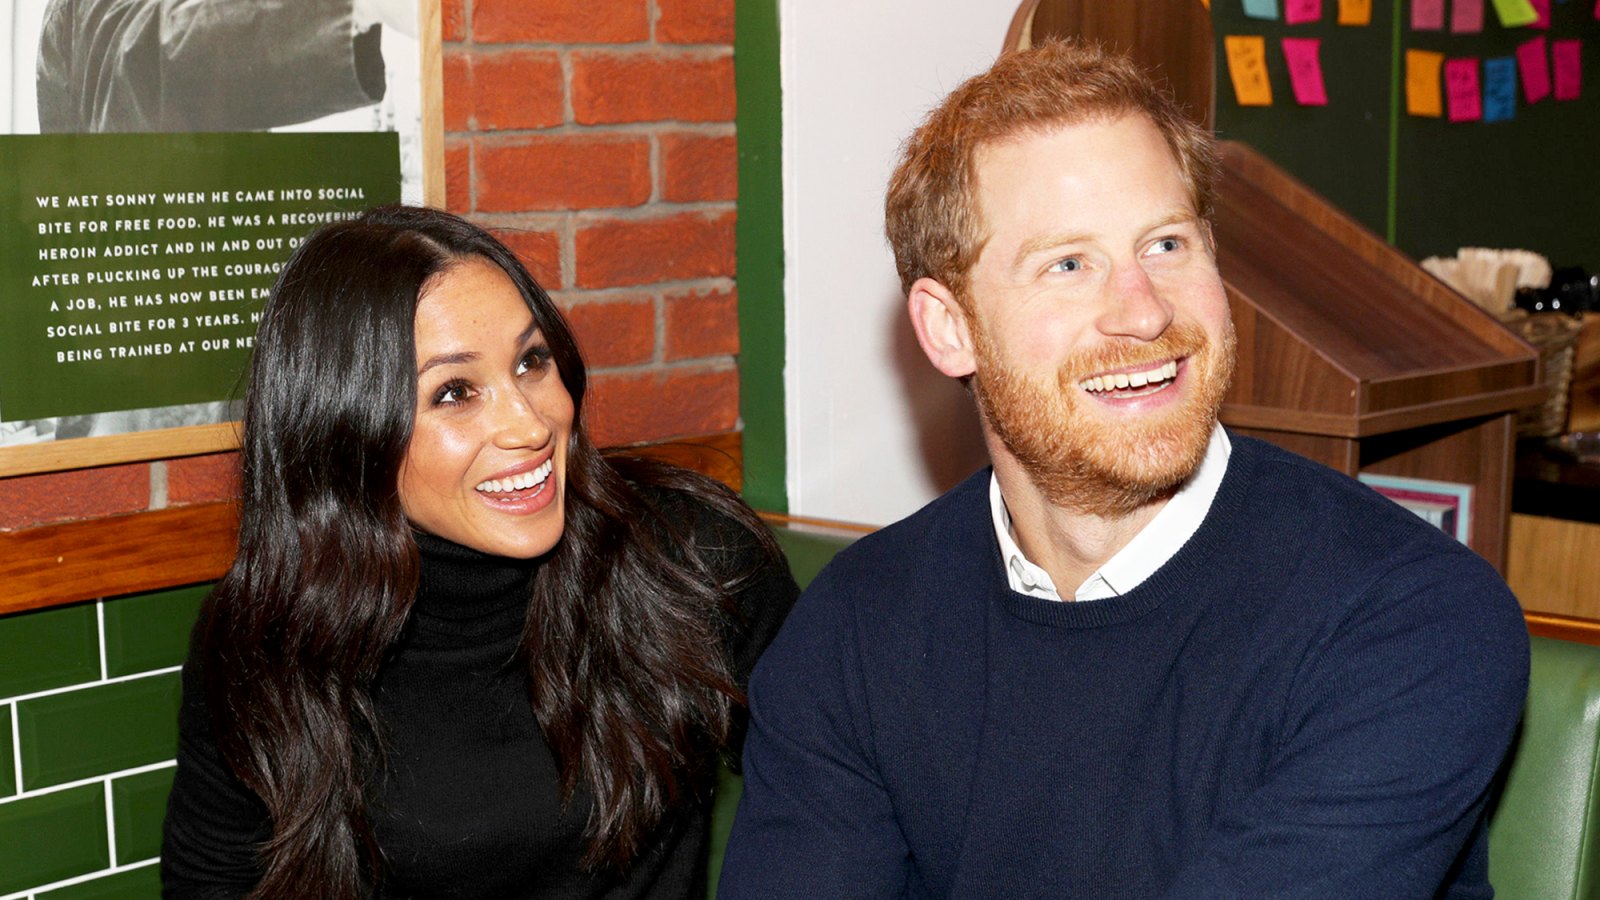 Prince Harry and Meghan Markle during a visit to Social Bite in Edinburgh, Scotland on February 13, 2018.